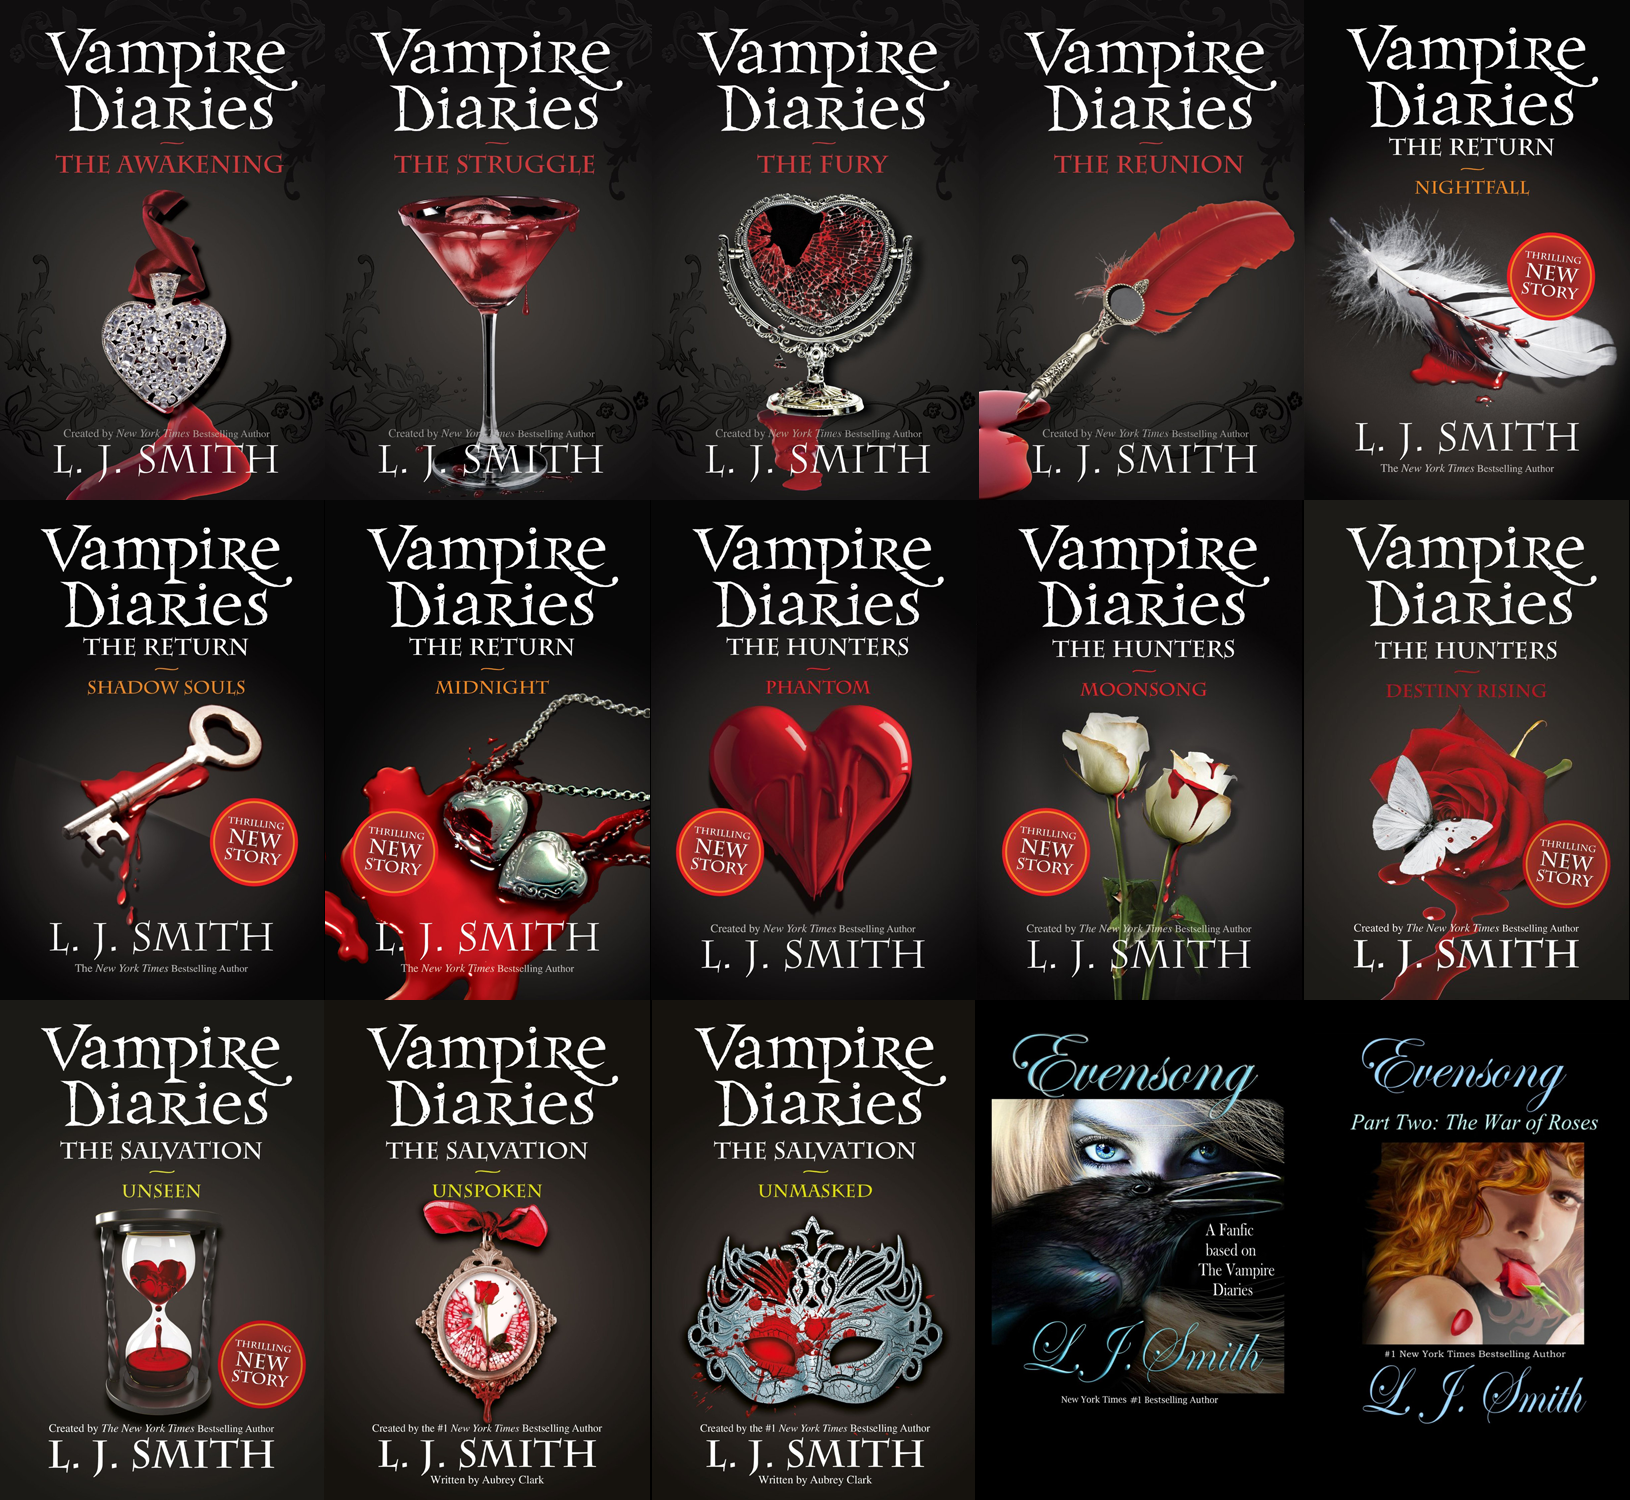 The Vampire Diaries (novel series) | The Vampire Diaries Wiki | FANDOM - What Is The Order Of The Vampire Diaries Series